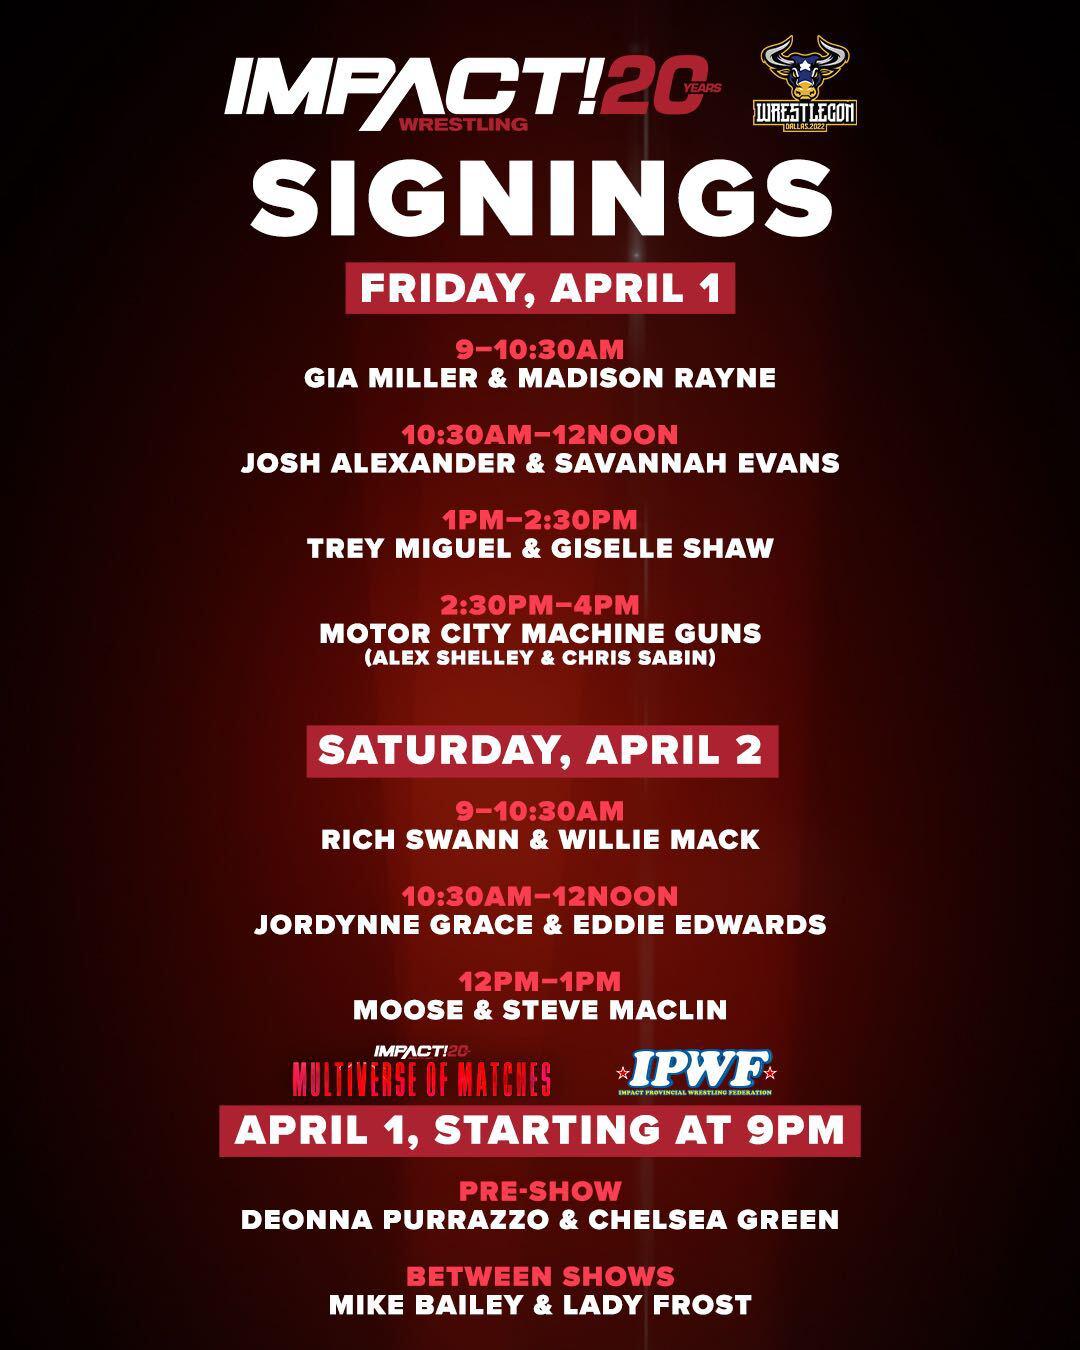 SCHEDULE OF IMPACT WRESTLING SIGNINGS AT WRESTLECON WrestlingFigs